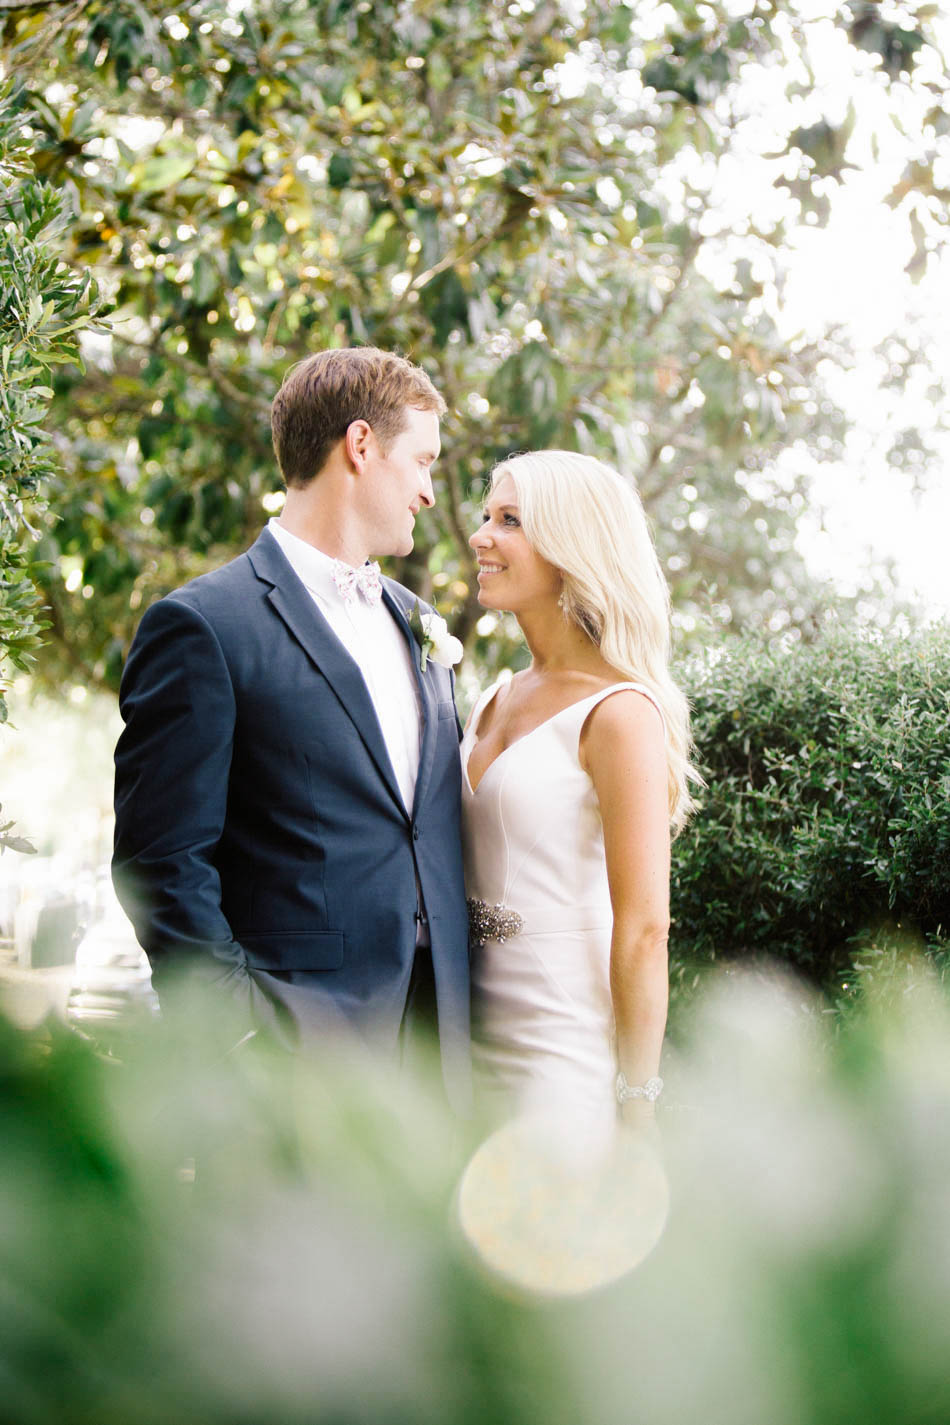 Bride and groom snuggle at the Rice Mill Building, Charleston, South Carolina Kate Timbers Photography. http://katetimbers.com #katetimbersphotography // Charleston Photography // Inspiration